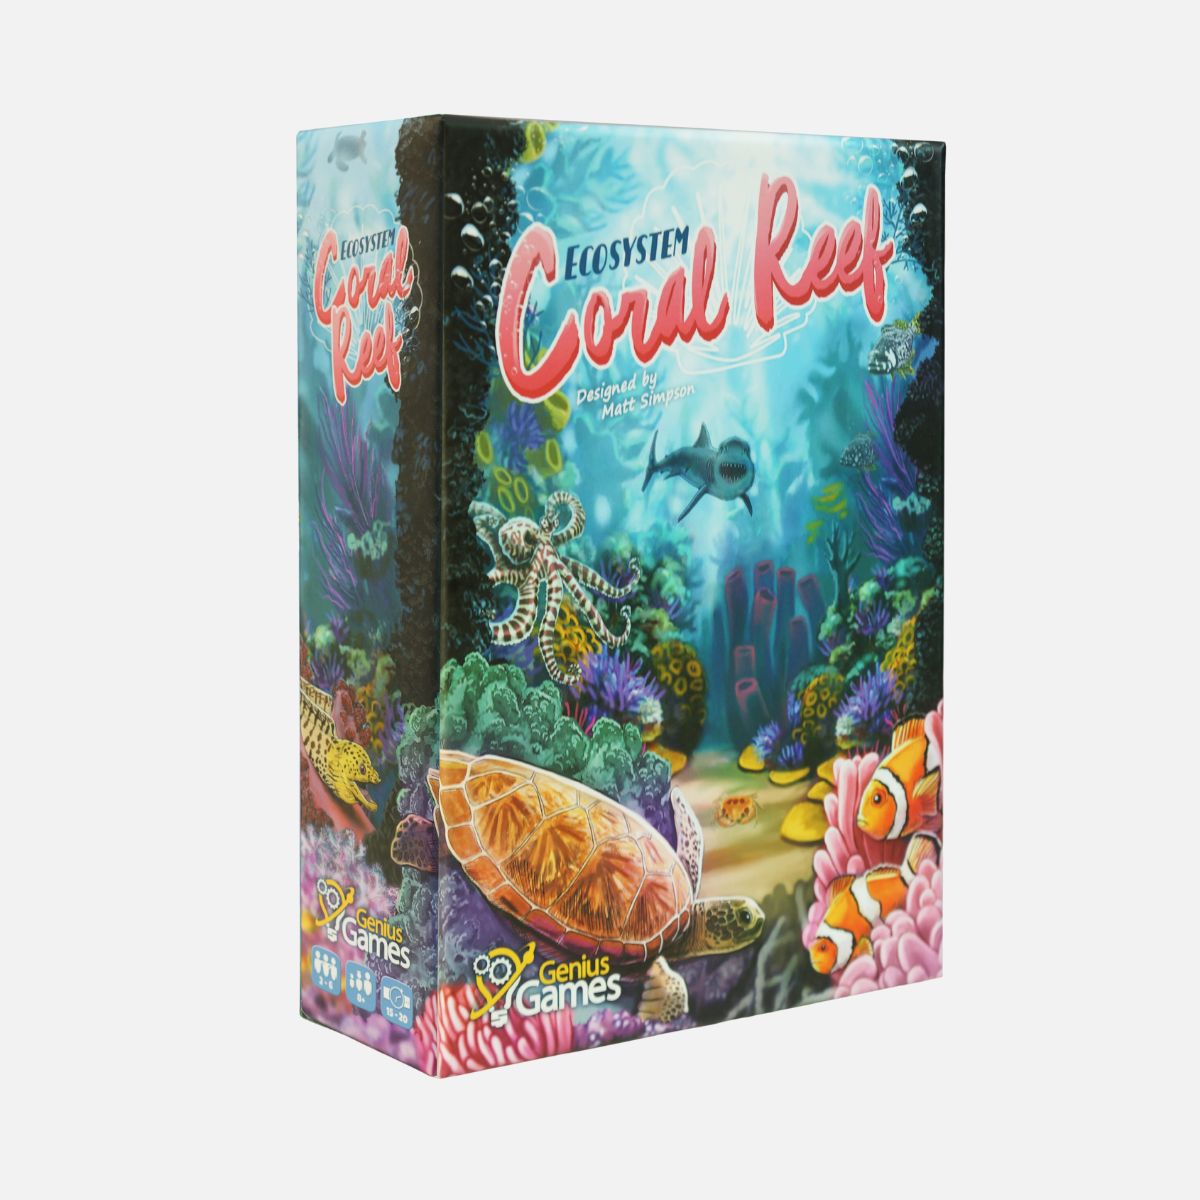 Ecosystem Coral Reef board game